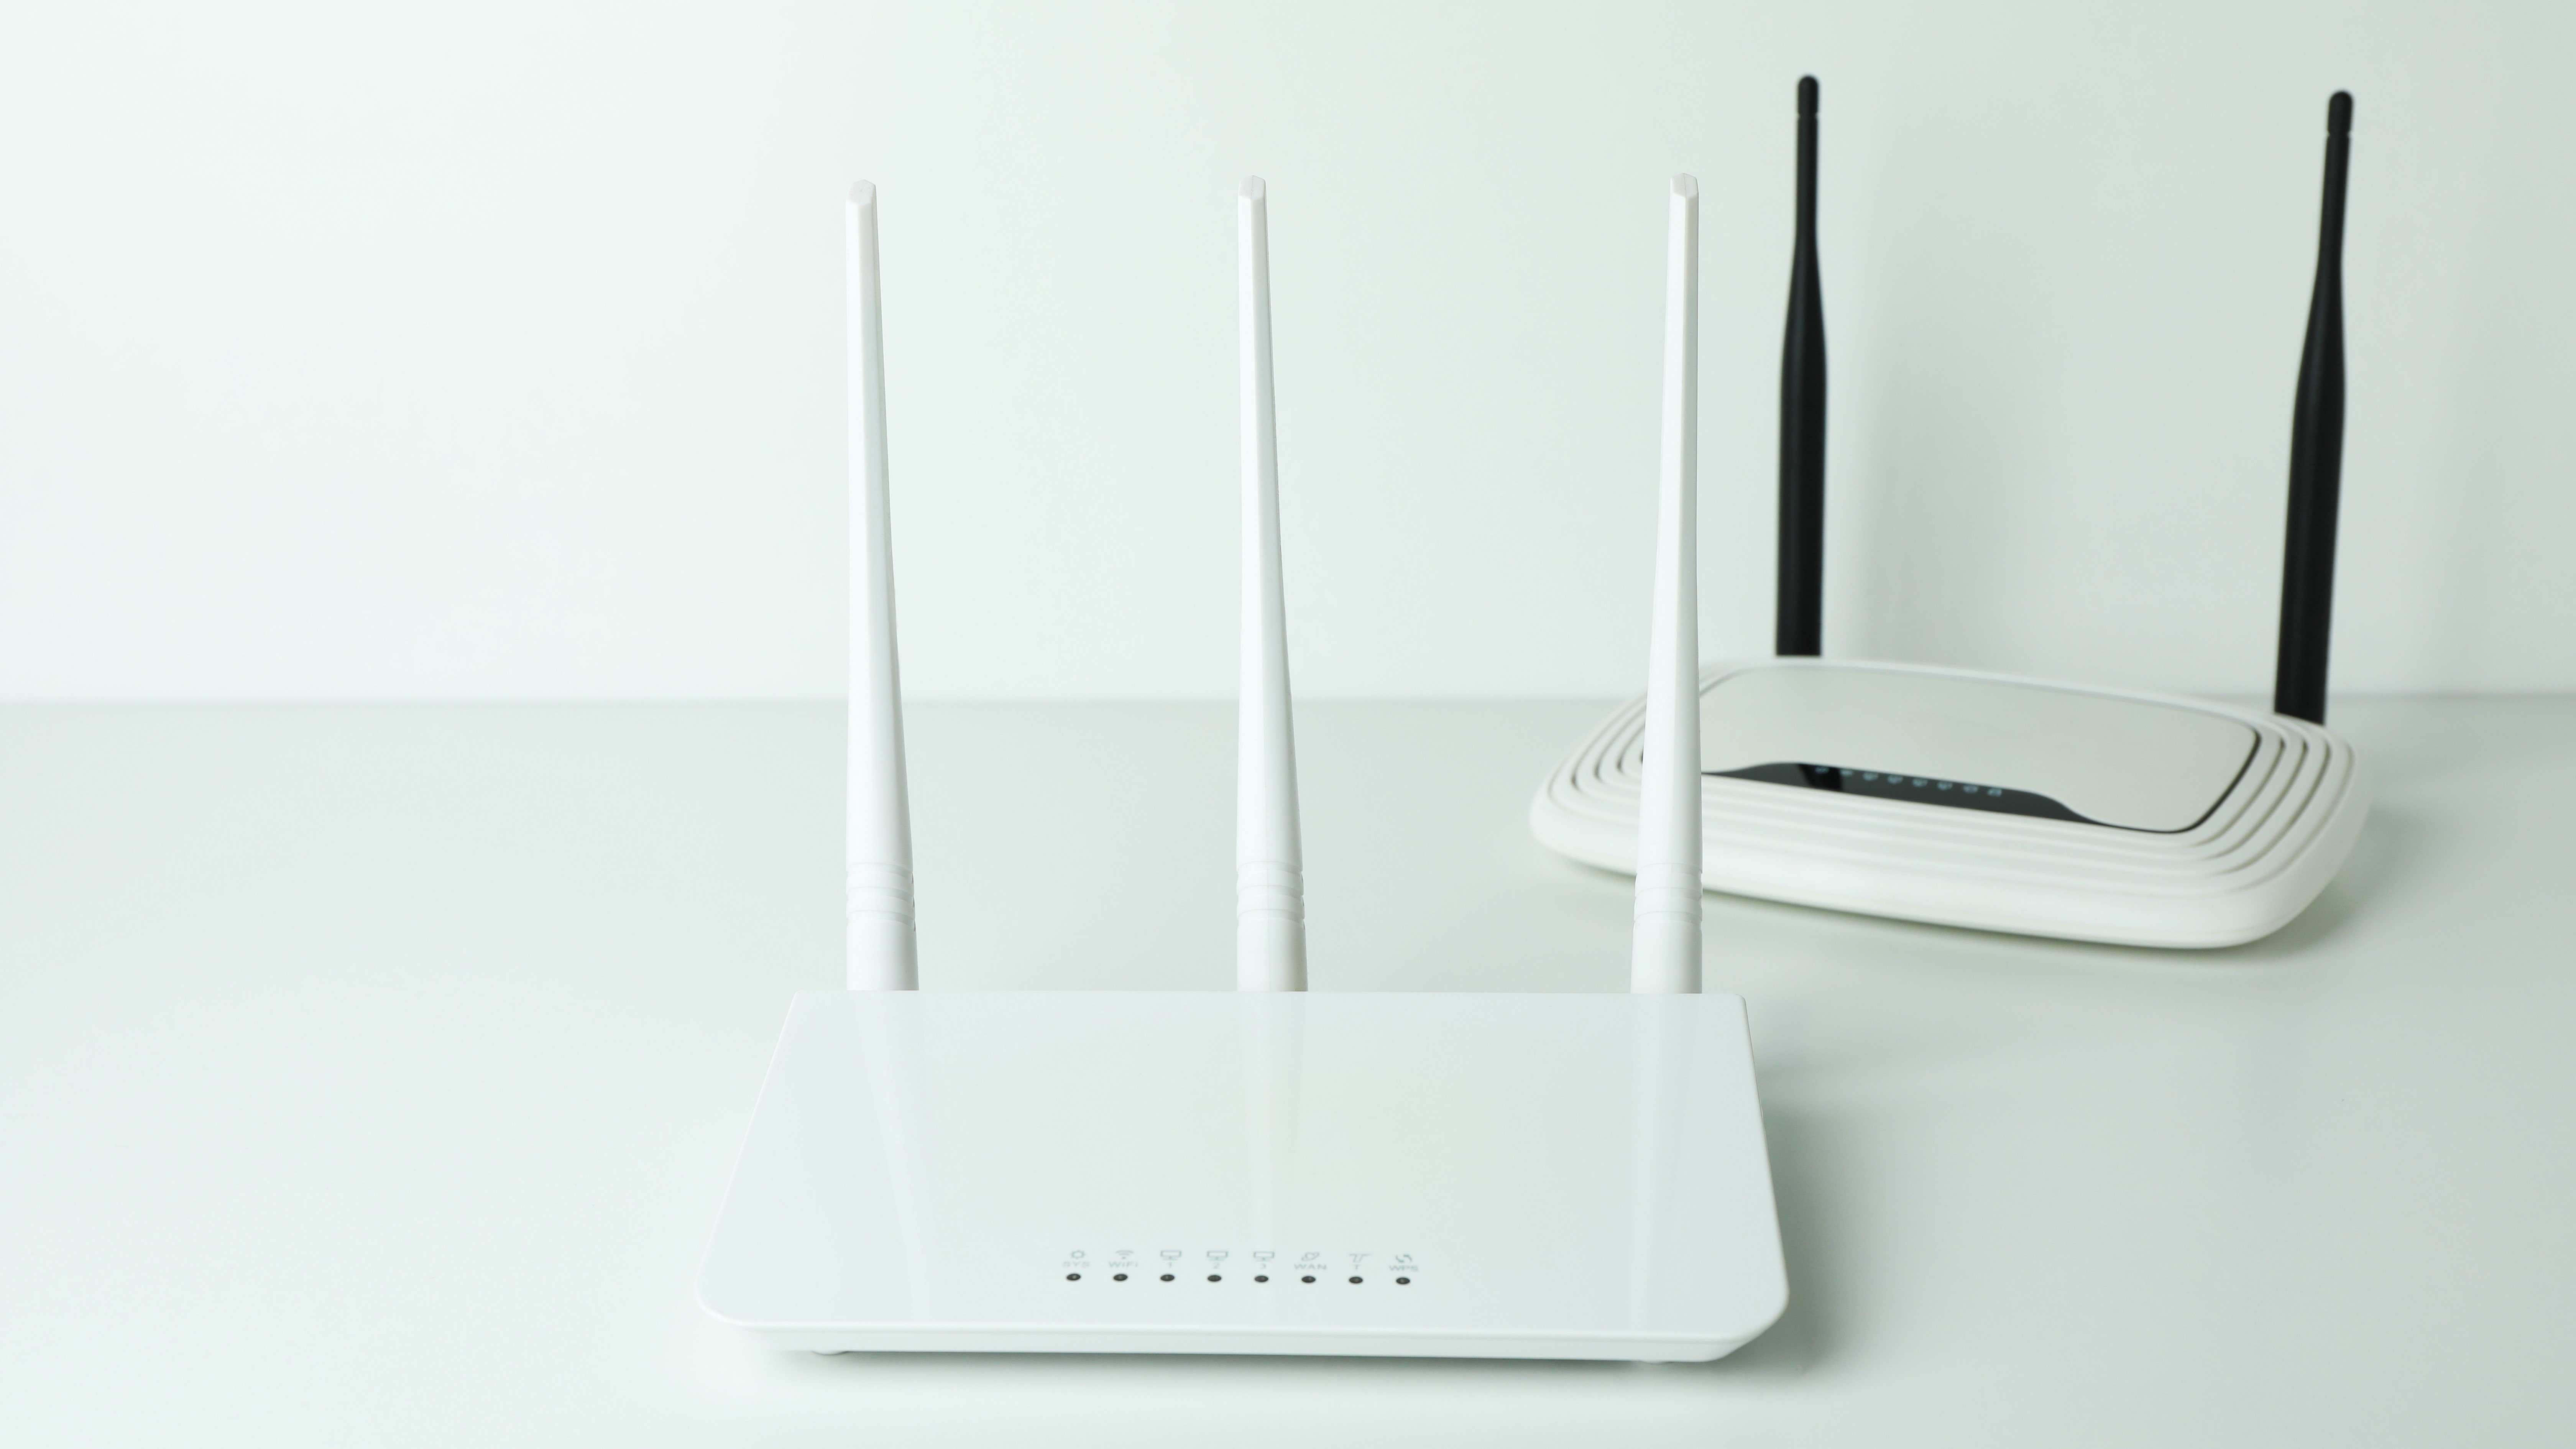 Got $70? That's all this Wi-Fi 6 router costs - CNET